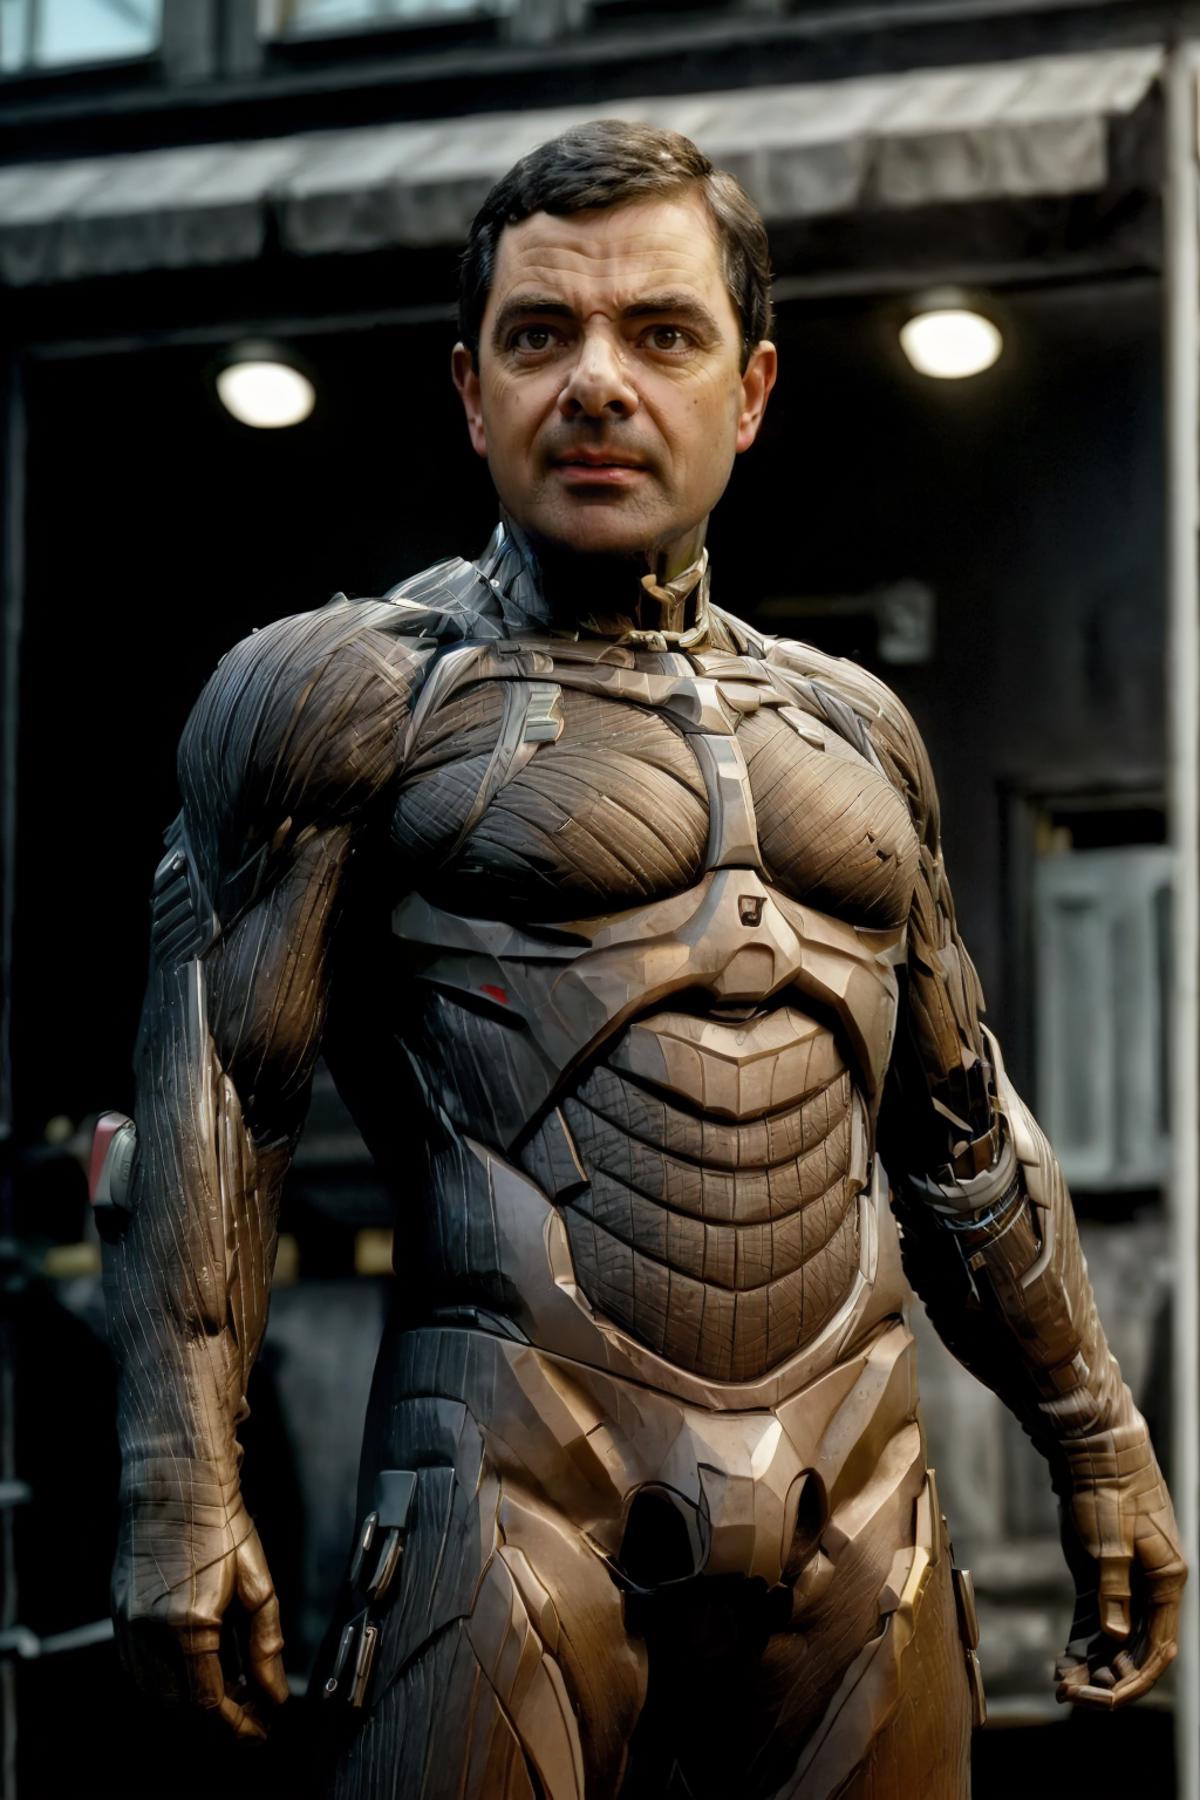 A man wearing a muscular armored suit with his arms crossed.